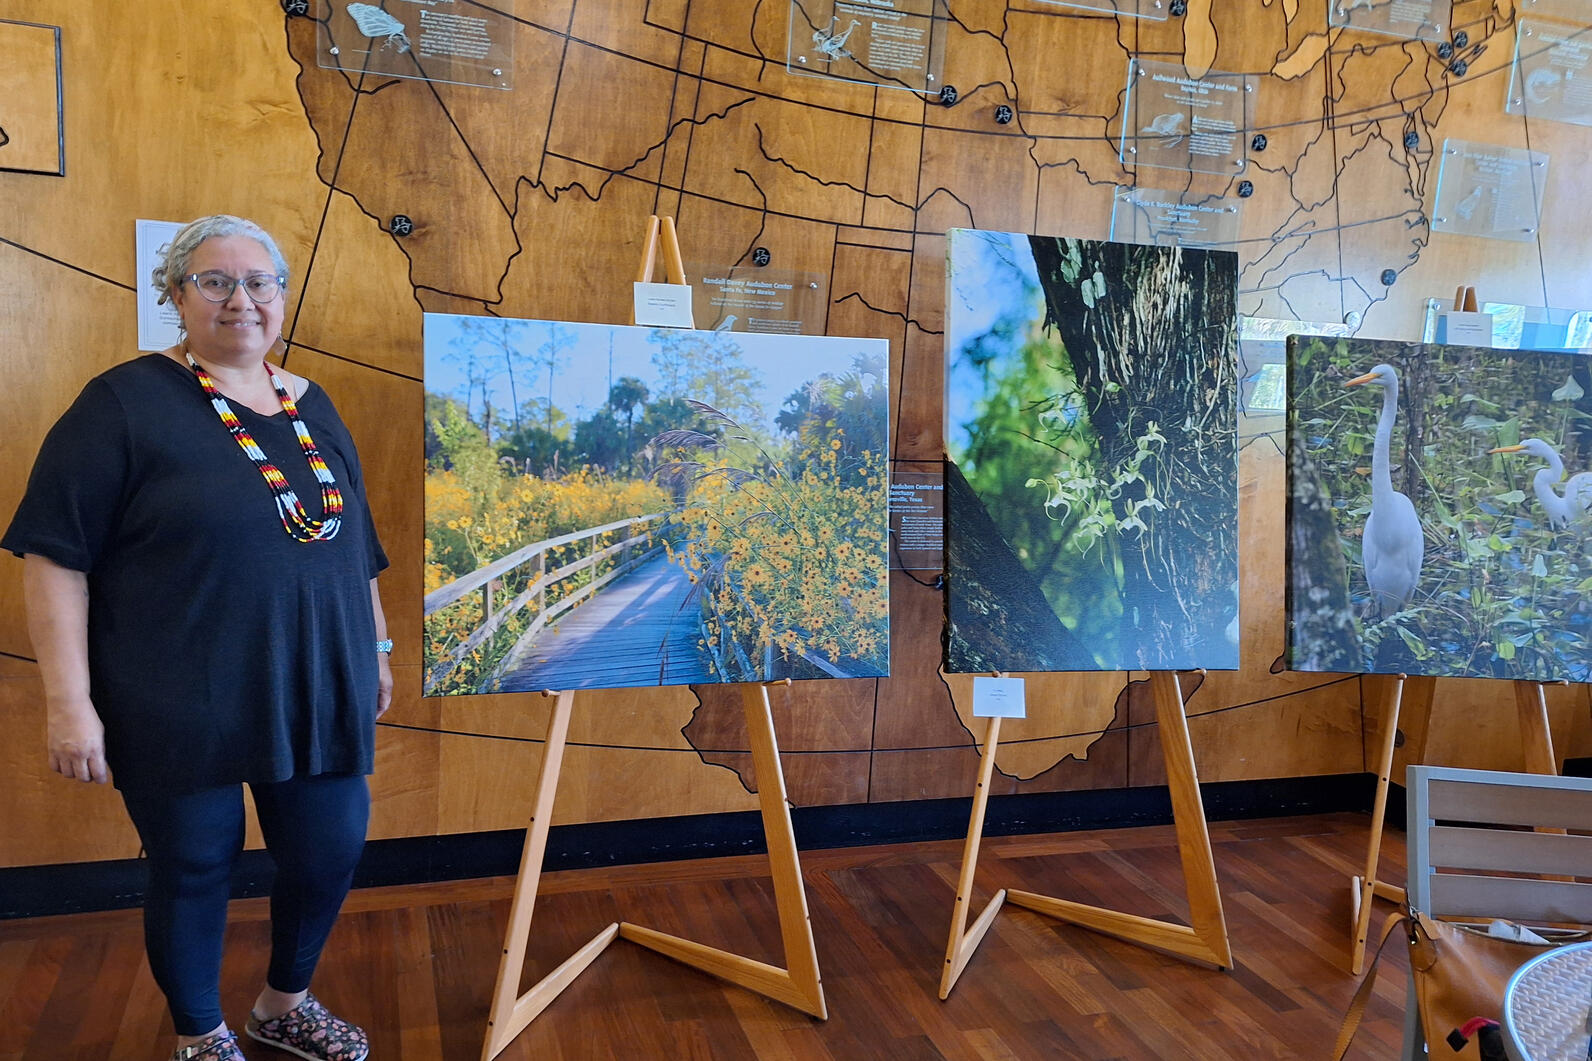 A woman standing next to 3 easels with nature photographs